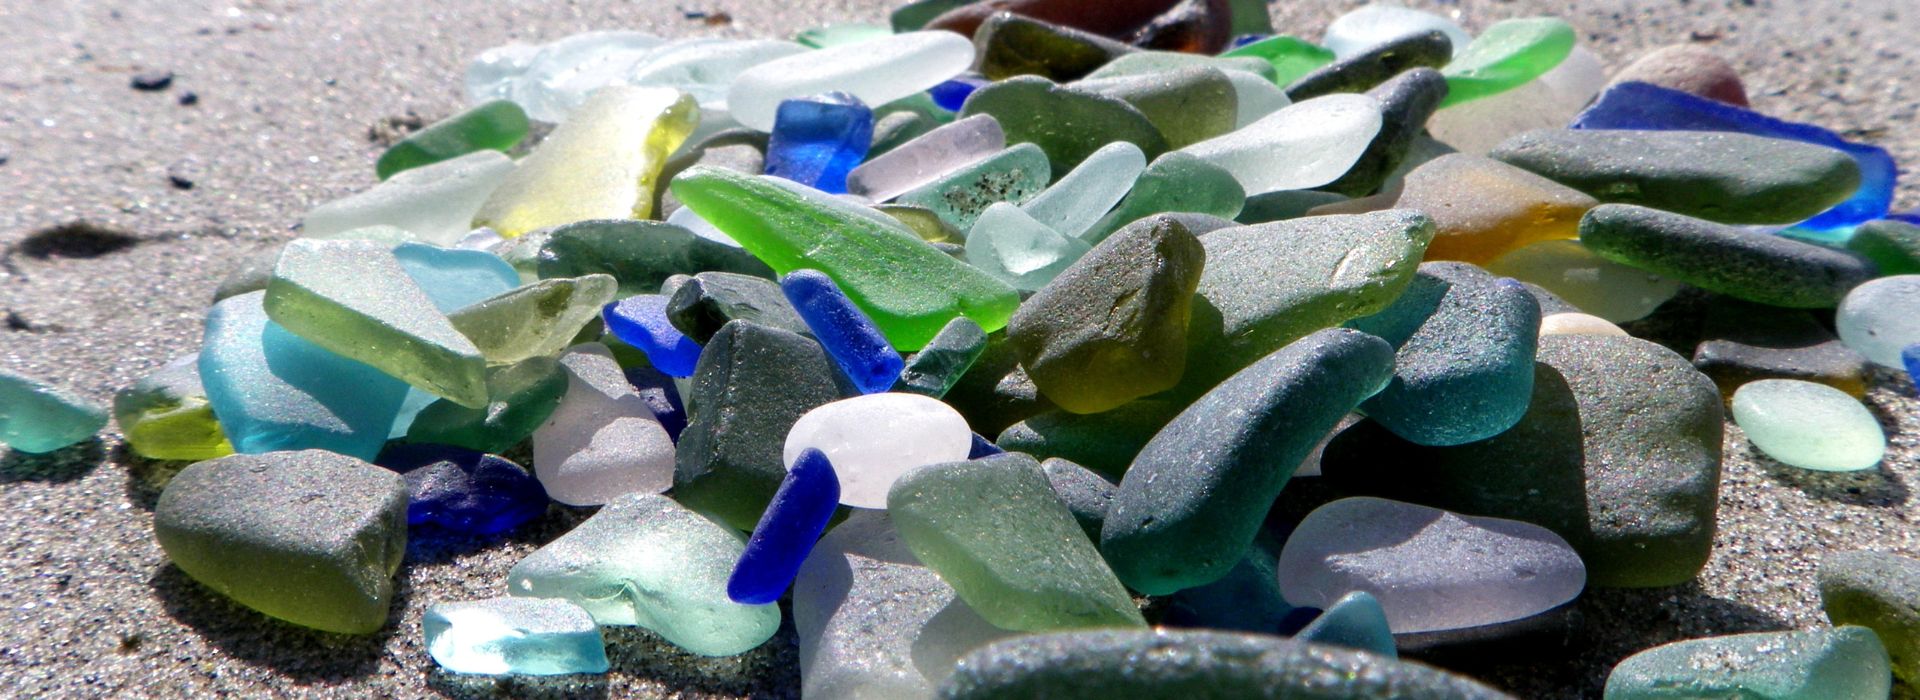 Small pile of colored sea glass on the beach